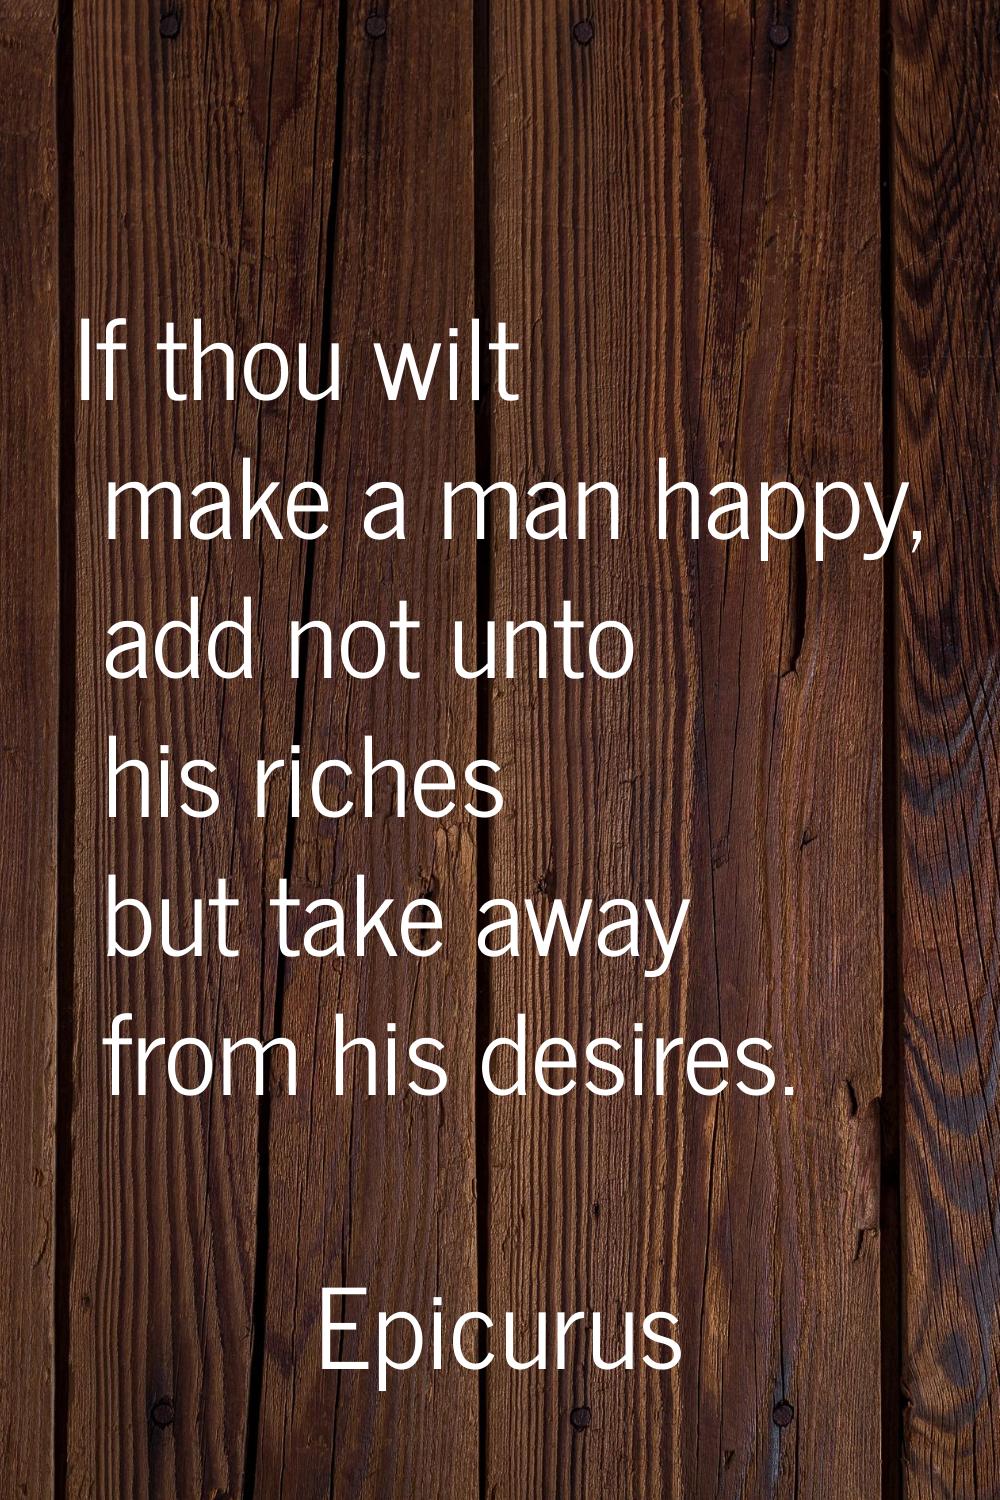 If thou wilt make a man happy, add not unto his riches but take away from his desires.